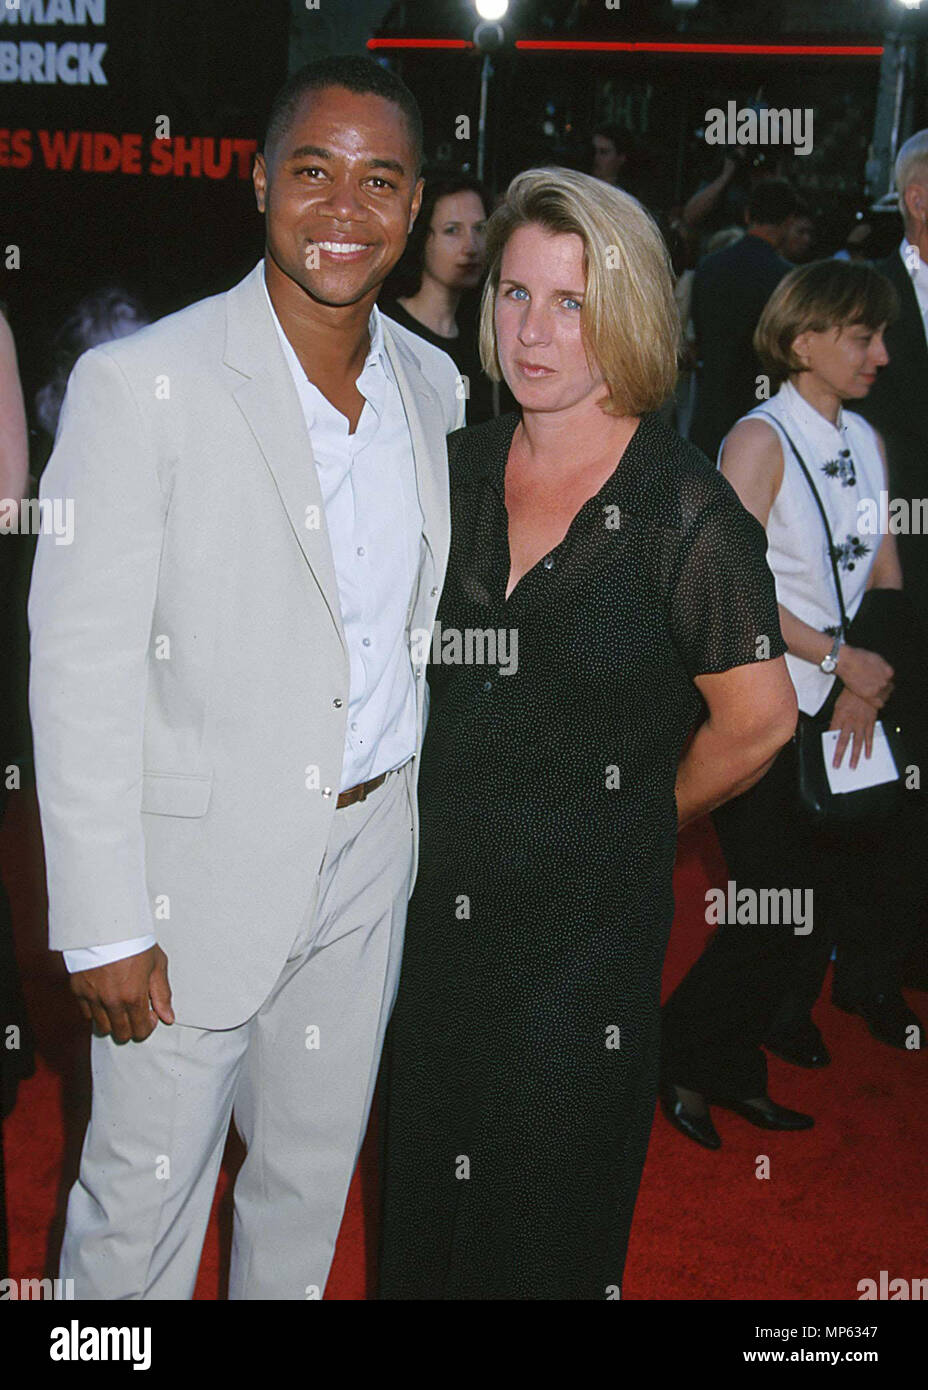 Goldwin Tony & fam. wife saraGooding jr. Cuba & wife  Event in Hollywood Life - California, Red Carpet Event, USA, Film Industry, Celebrities, Photography, Bestof, Arts Culture and Entertainment, Topix Celebrities fashion, Best of, Hollywood Life, Event in Hollywood Life - California, Red Carpet and backstage, movie celebrities, TV celebrities, Music celebrities, Topix, Bestof, Arts Culture and Entertainment, vertical, one person, Photography,   Three Quarters, 1993 to 1999, inquiry tsuni@Gamma-USA.com , Credit Tsuni / USA,   === Red Carpet Event, USA, Film Industry, Celebrities, Photography,  Stock Photo